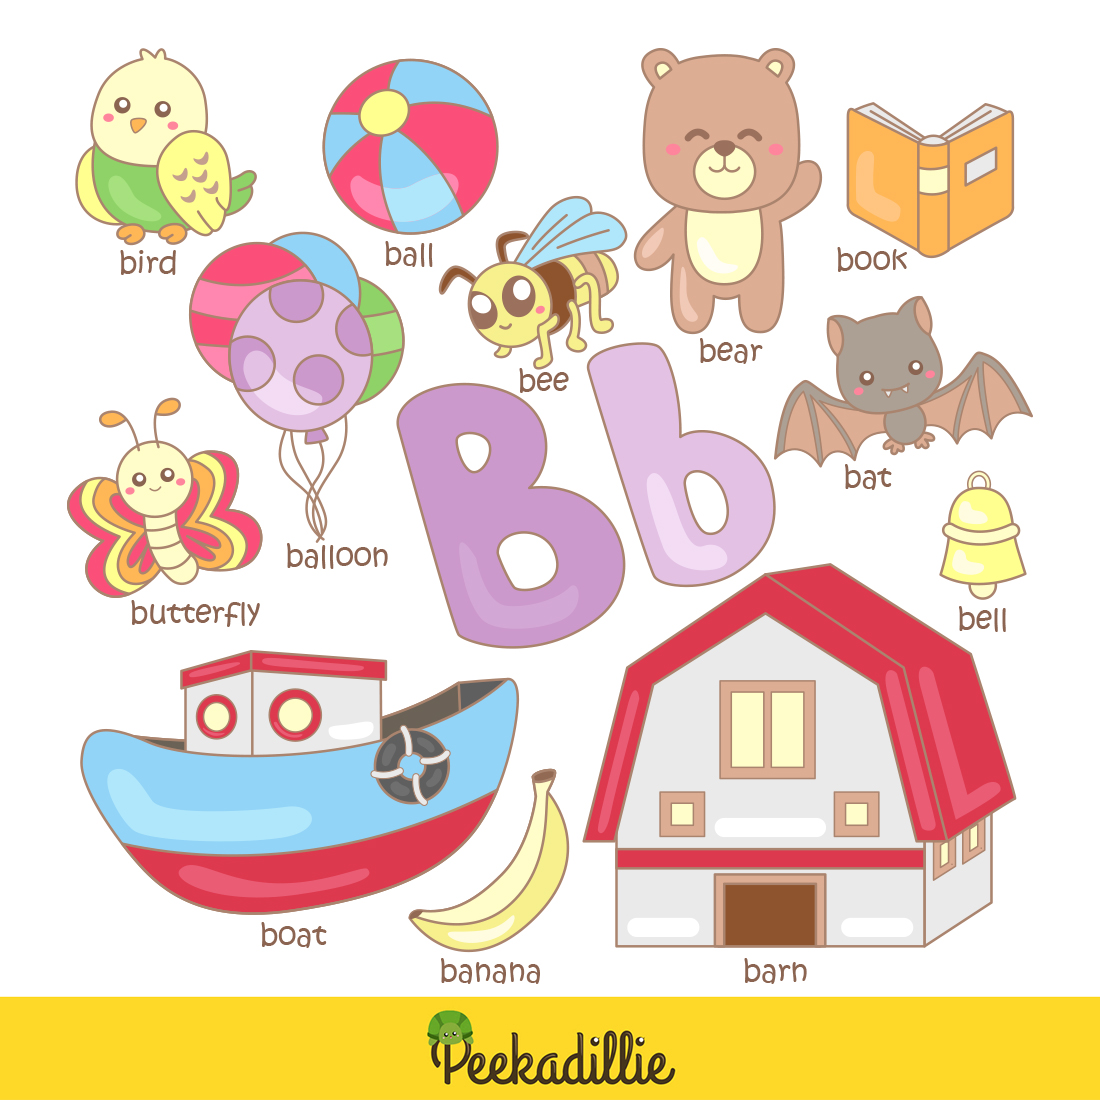 B For Vocabulary School Letter Reading Writing Font Study Learning Student Toodler Kids Balloon Bear Banana Butterfly Barn Ball Bird Bat Book Bell Boat Bee Cartoon Illustration Vector Clipart Sticker preview image.